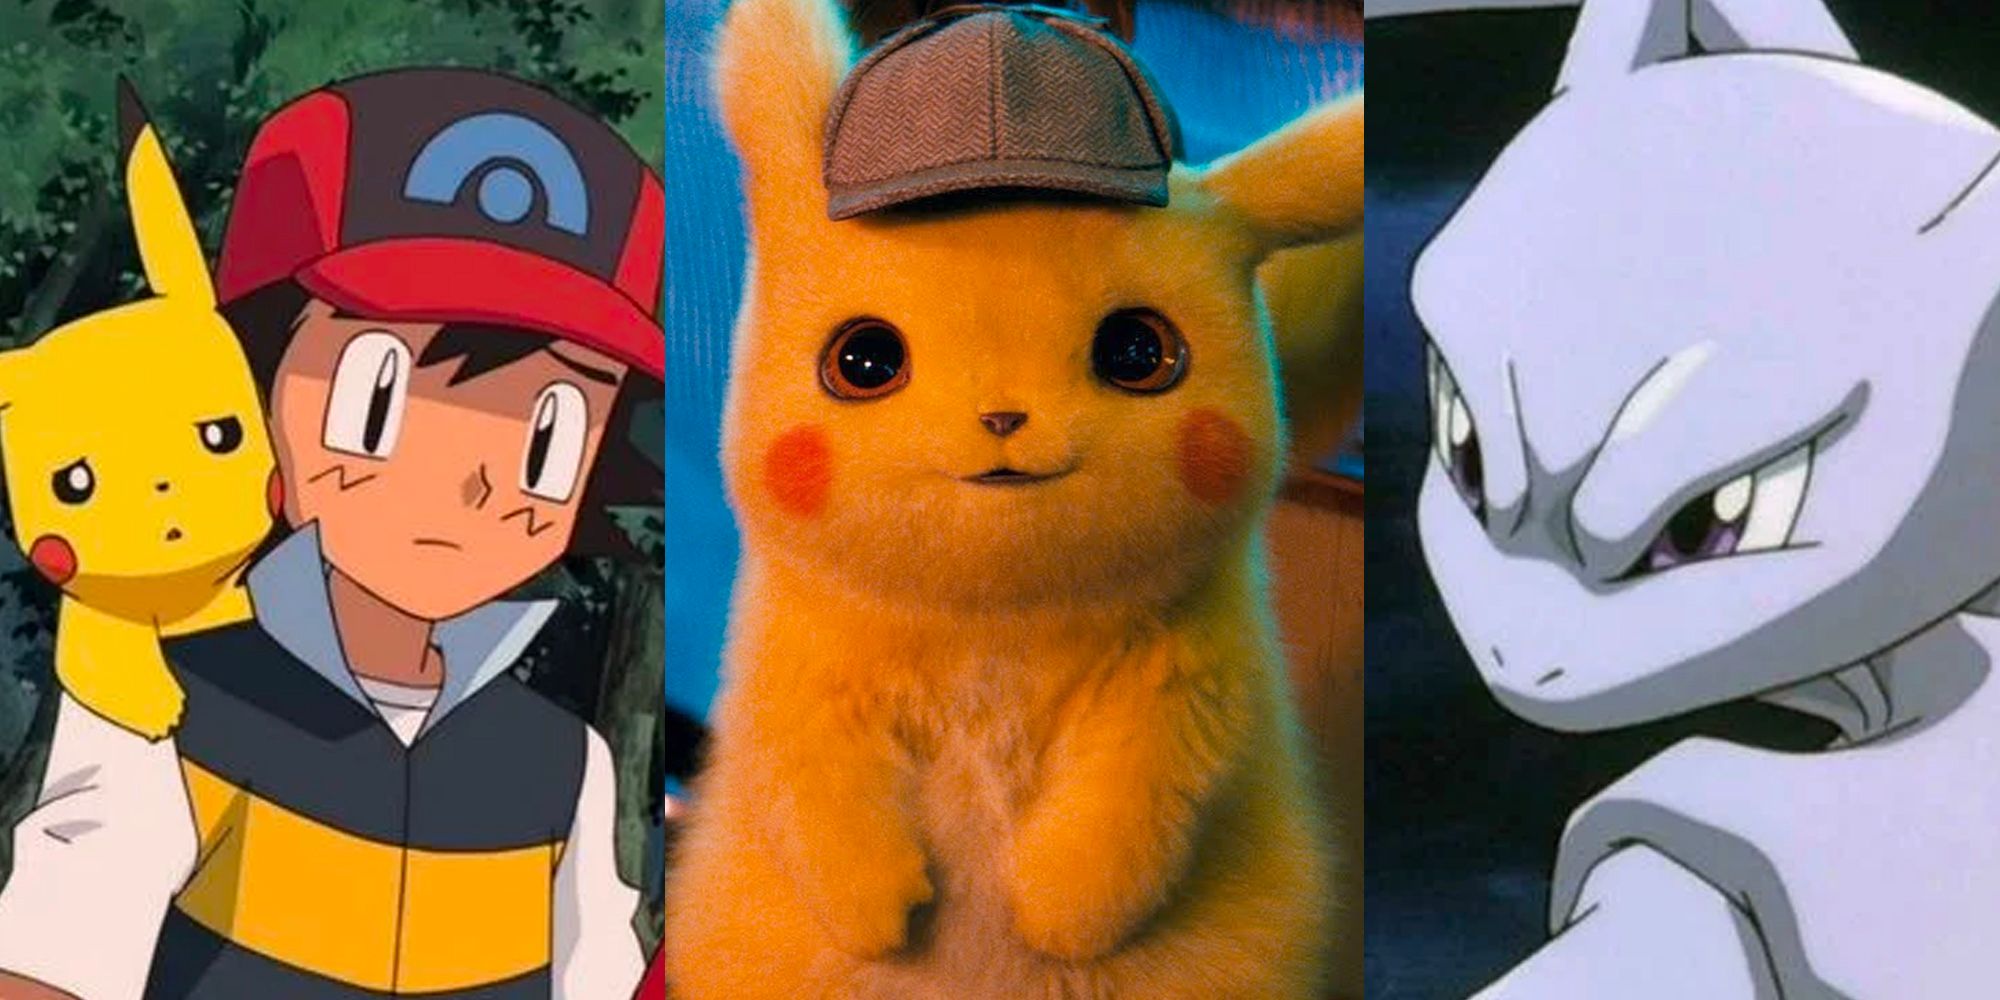 A colage of Ash, Pikachu and Mewtwo from various pokemon movies